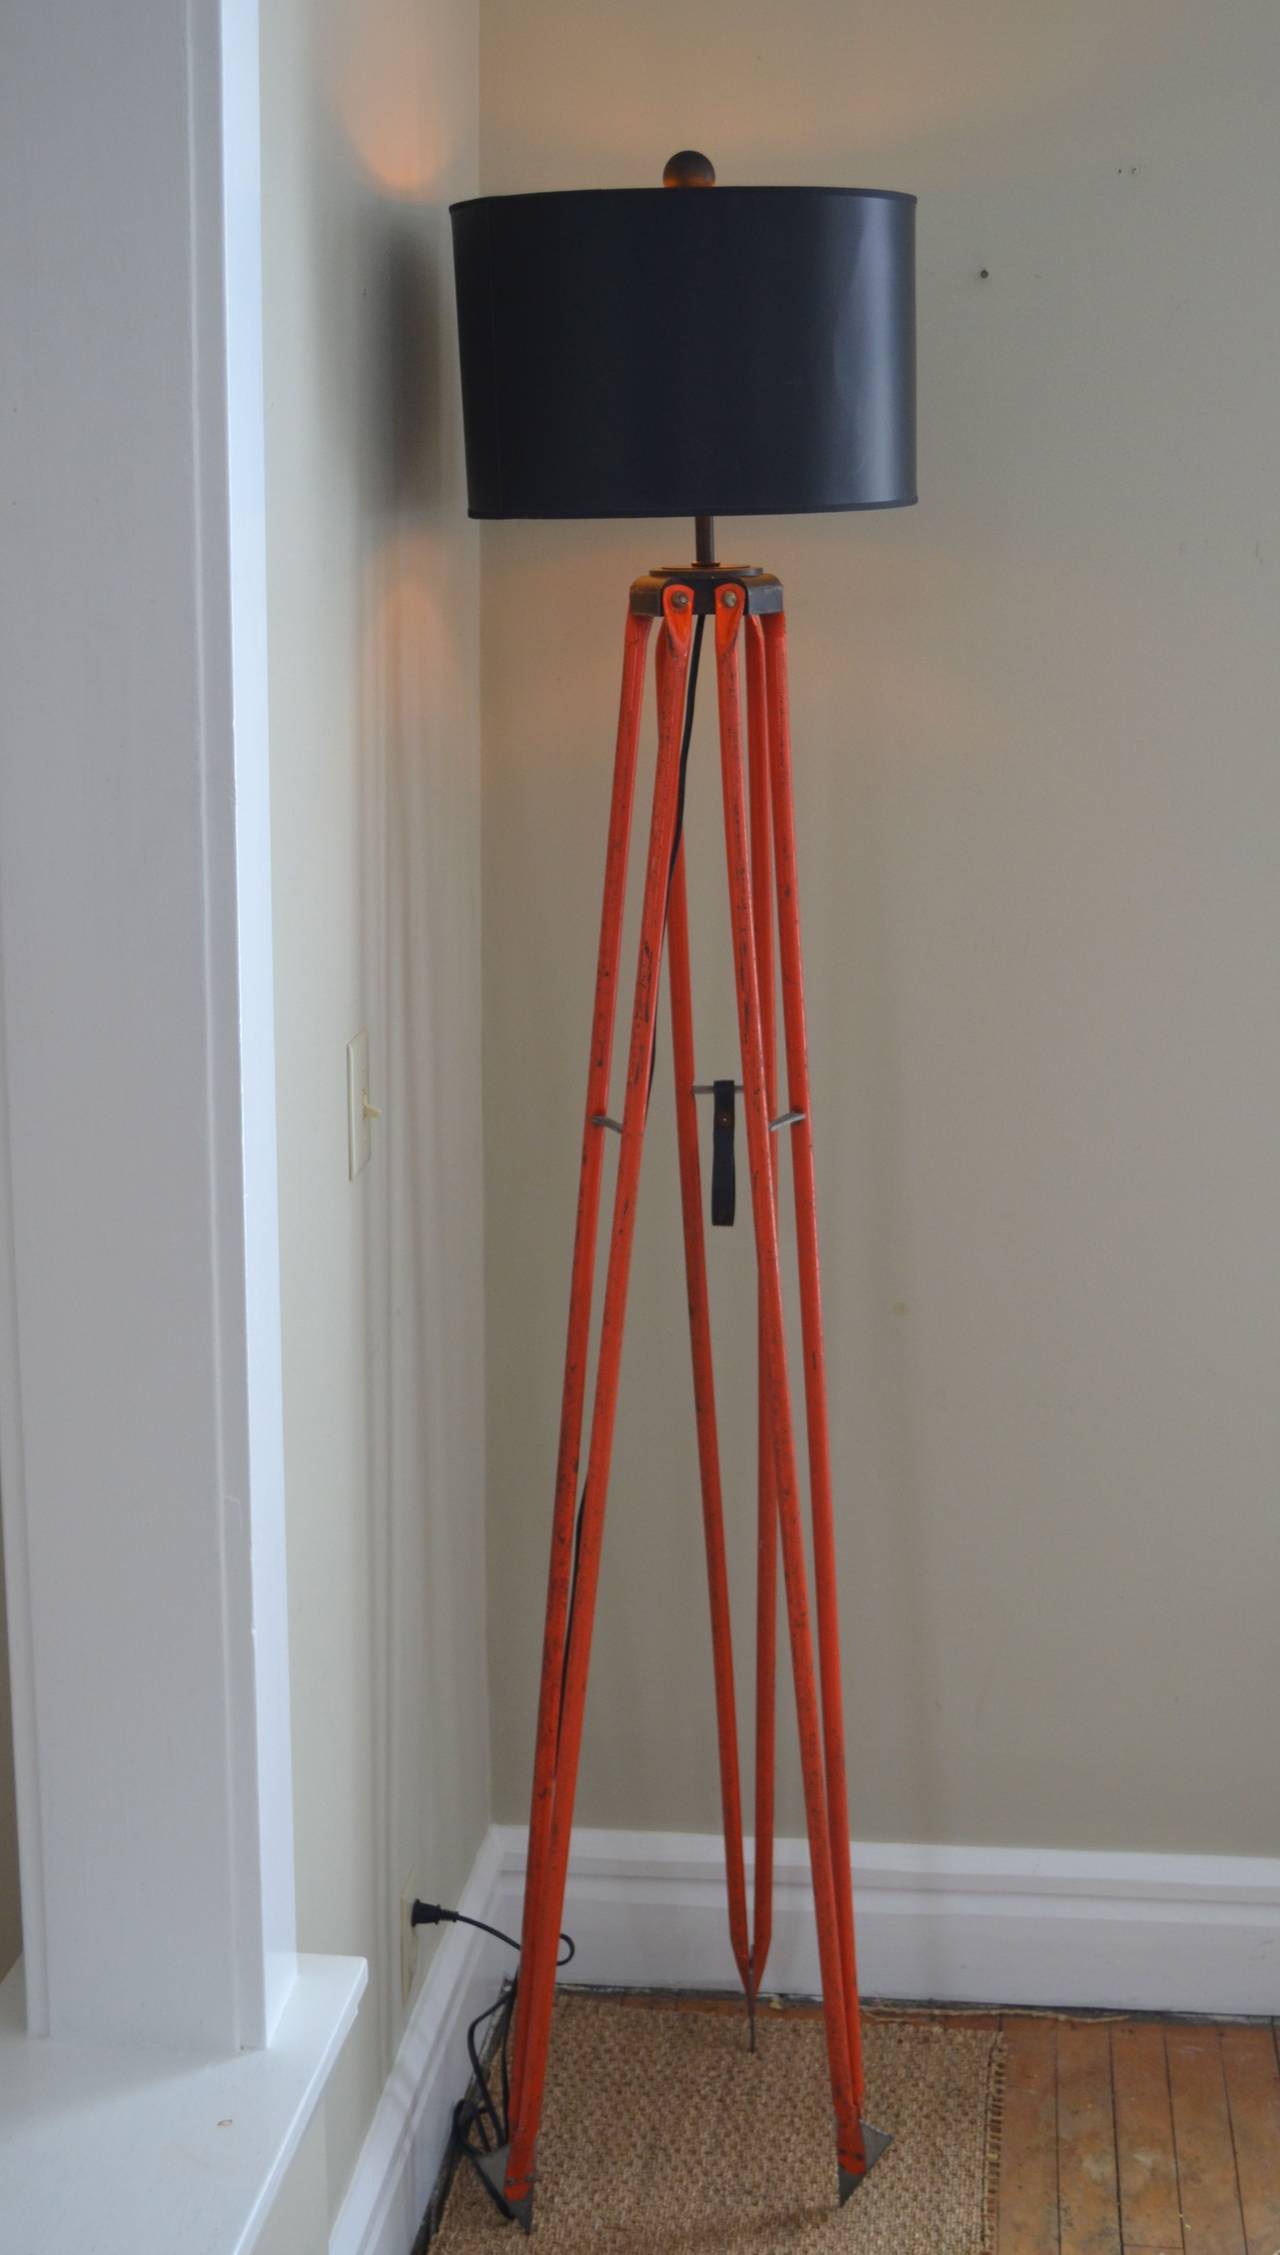 Surveyor's tripod of steel in as-found, field-tested orange paint from David White. Tall and elegant in its industrial steel stance, this floor lamp has been professionally-wired with 10' black cord, 3-way socket (150-watt maximum), 8